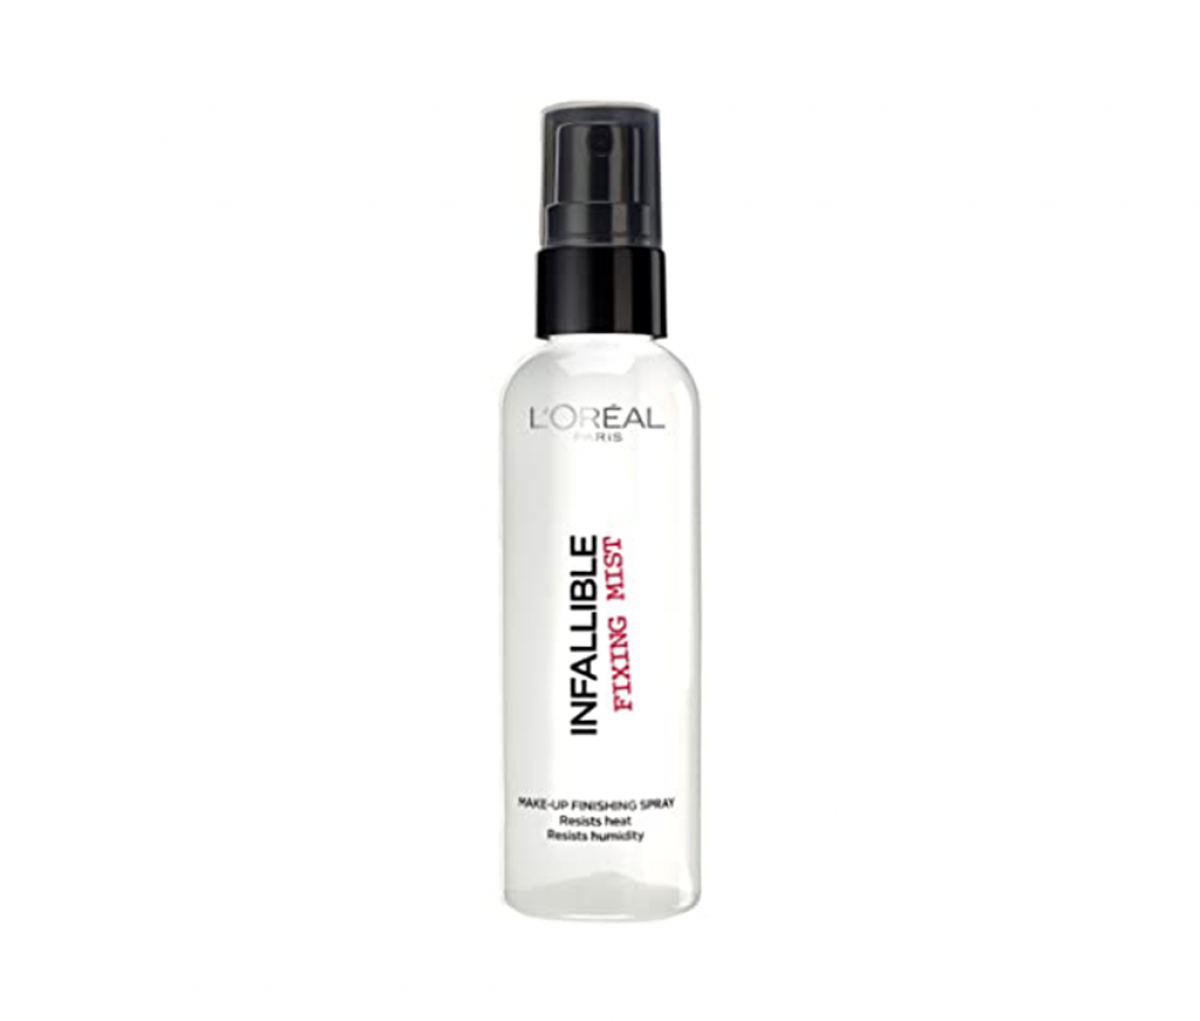 L Oreal 01 Infaillible Make Up Fixing mist